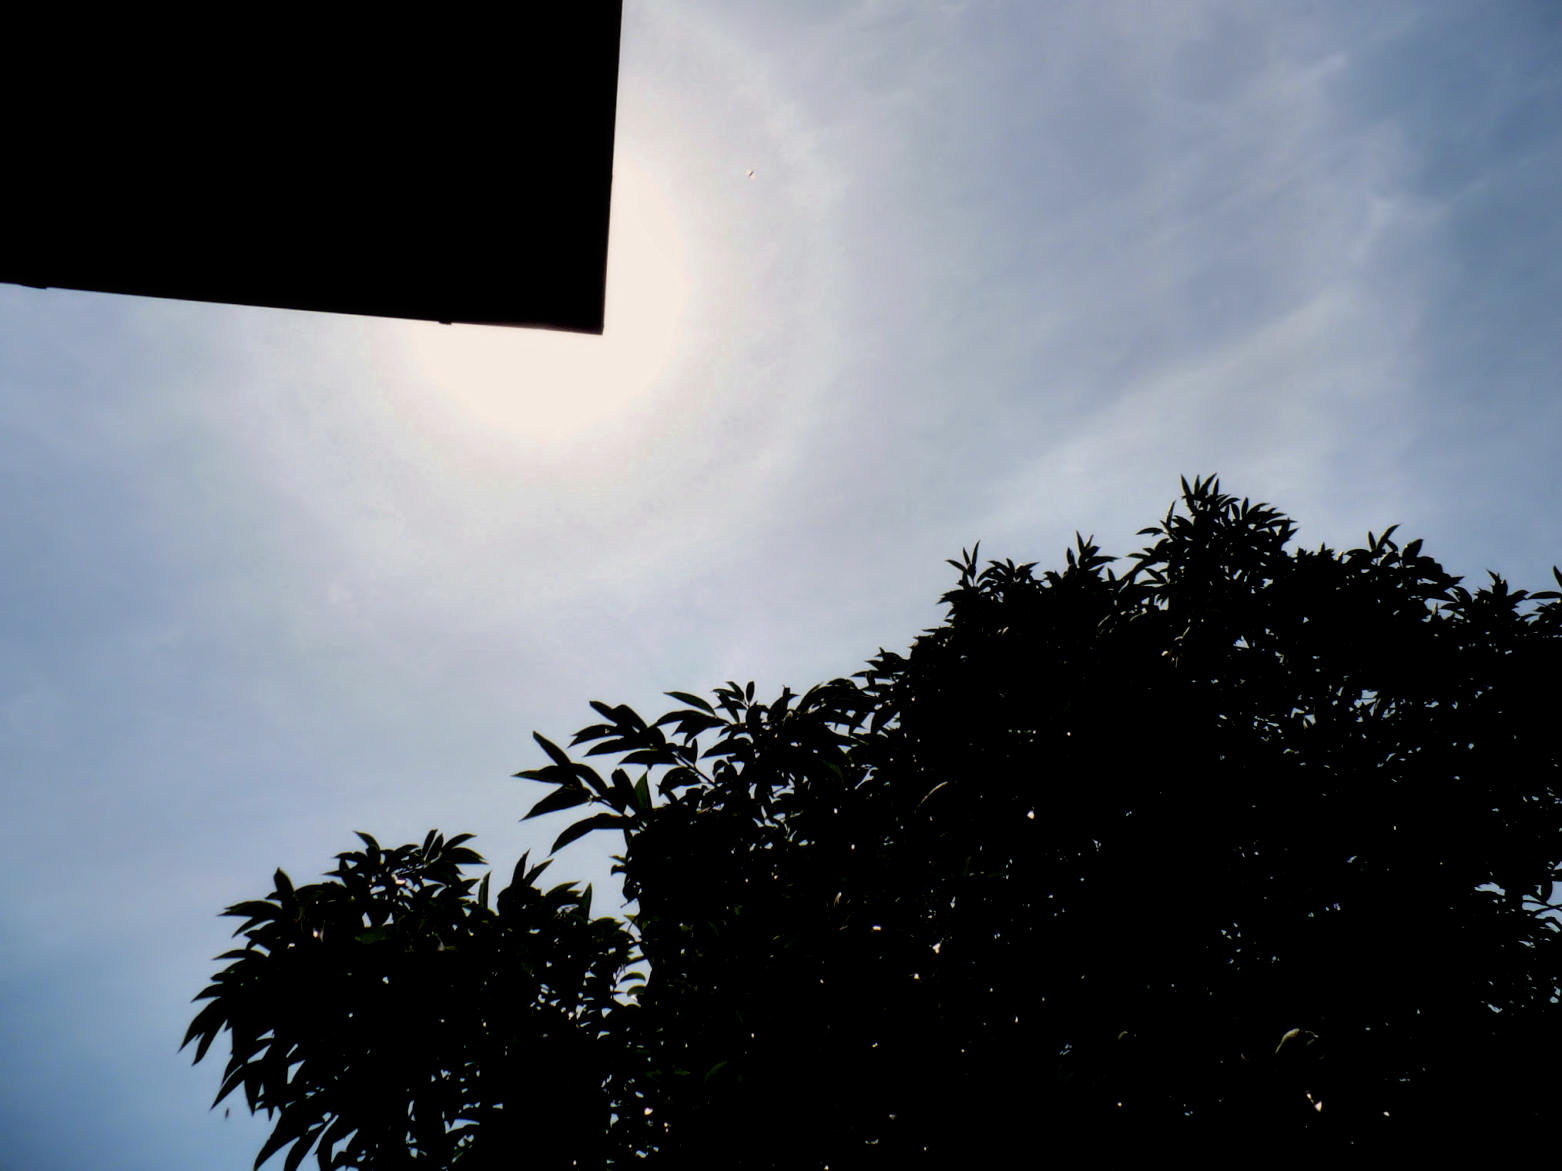 Solar Halos: 138 KB; click on the image to enlarge at 1562x1171 pixels